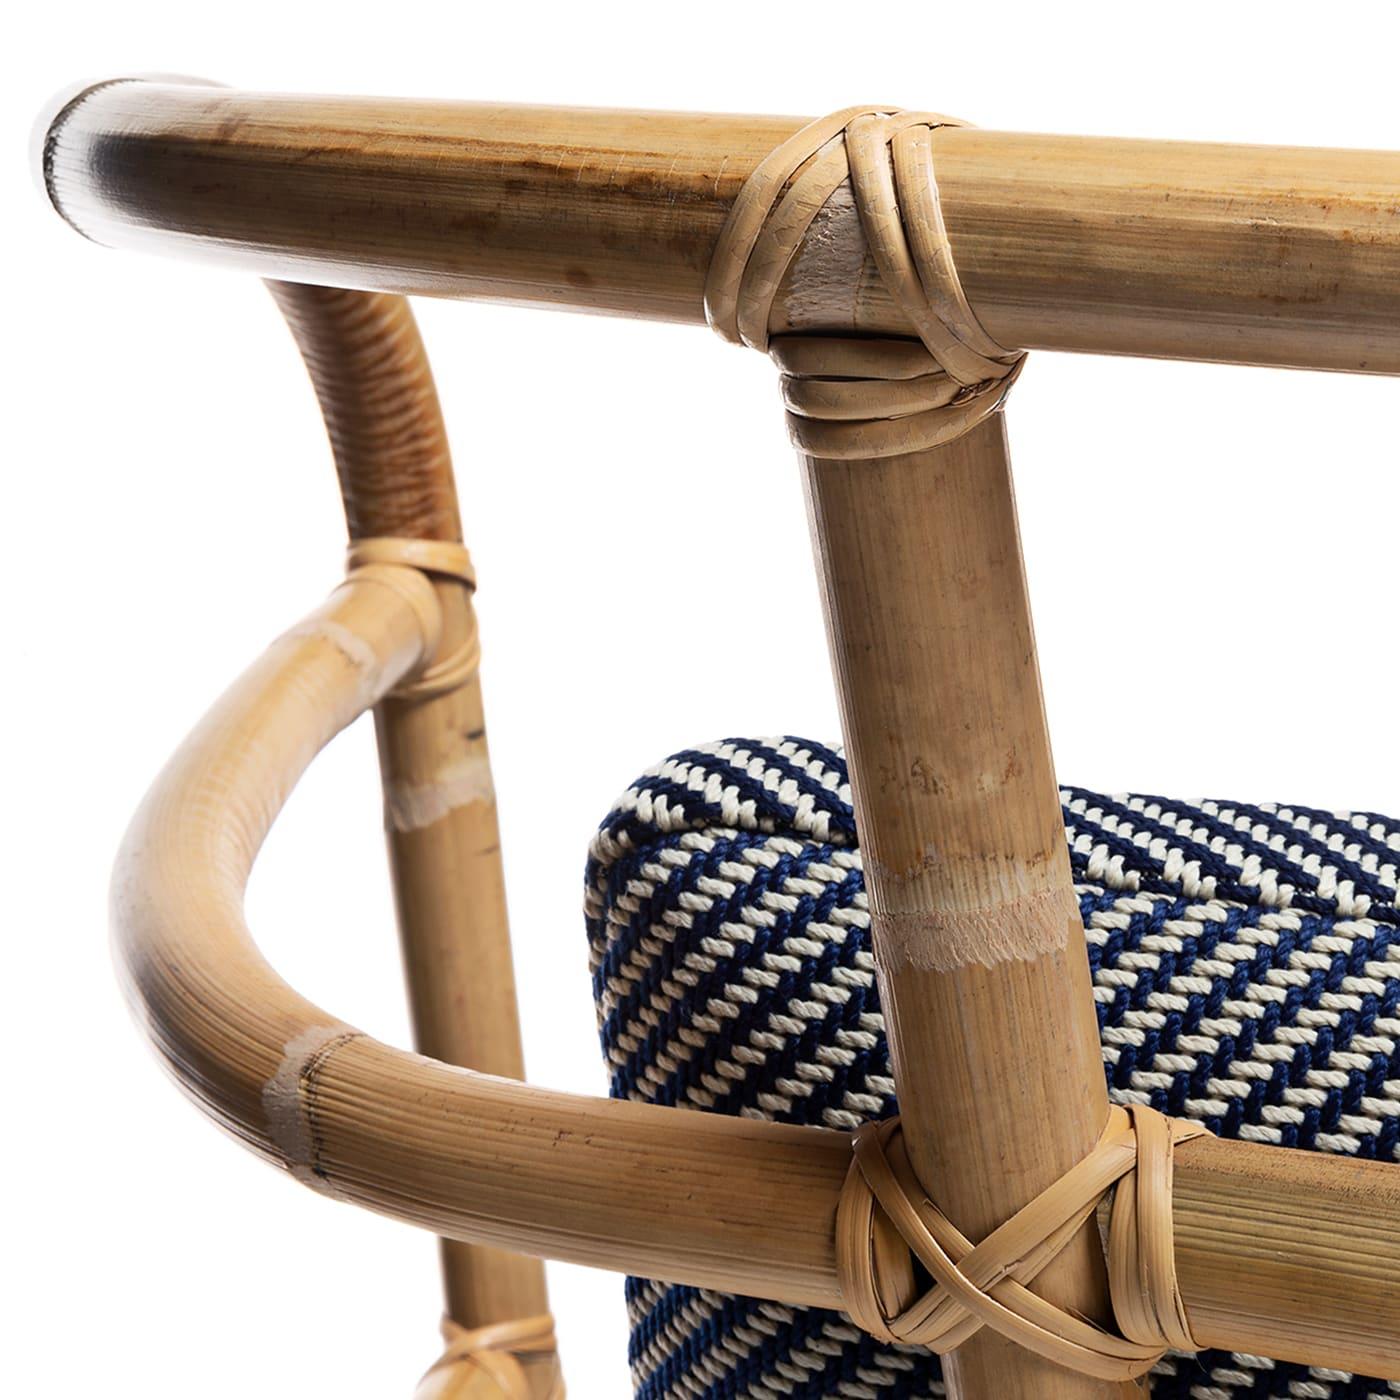 A singular piece of sophisticated value, this design belongs to the Jungle Collection by Massimo Castagna. Distinguished by a stupendous bamboo cane backrest that enhances its natural inspiration, it features a softly padded seat upholstered with